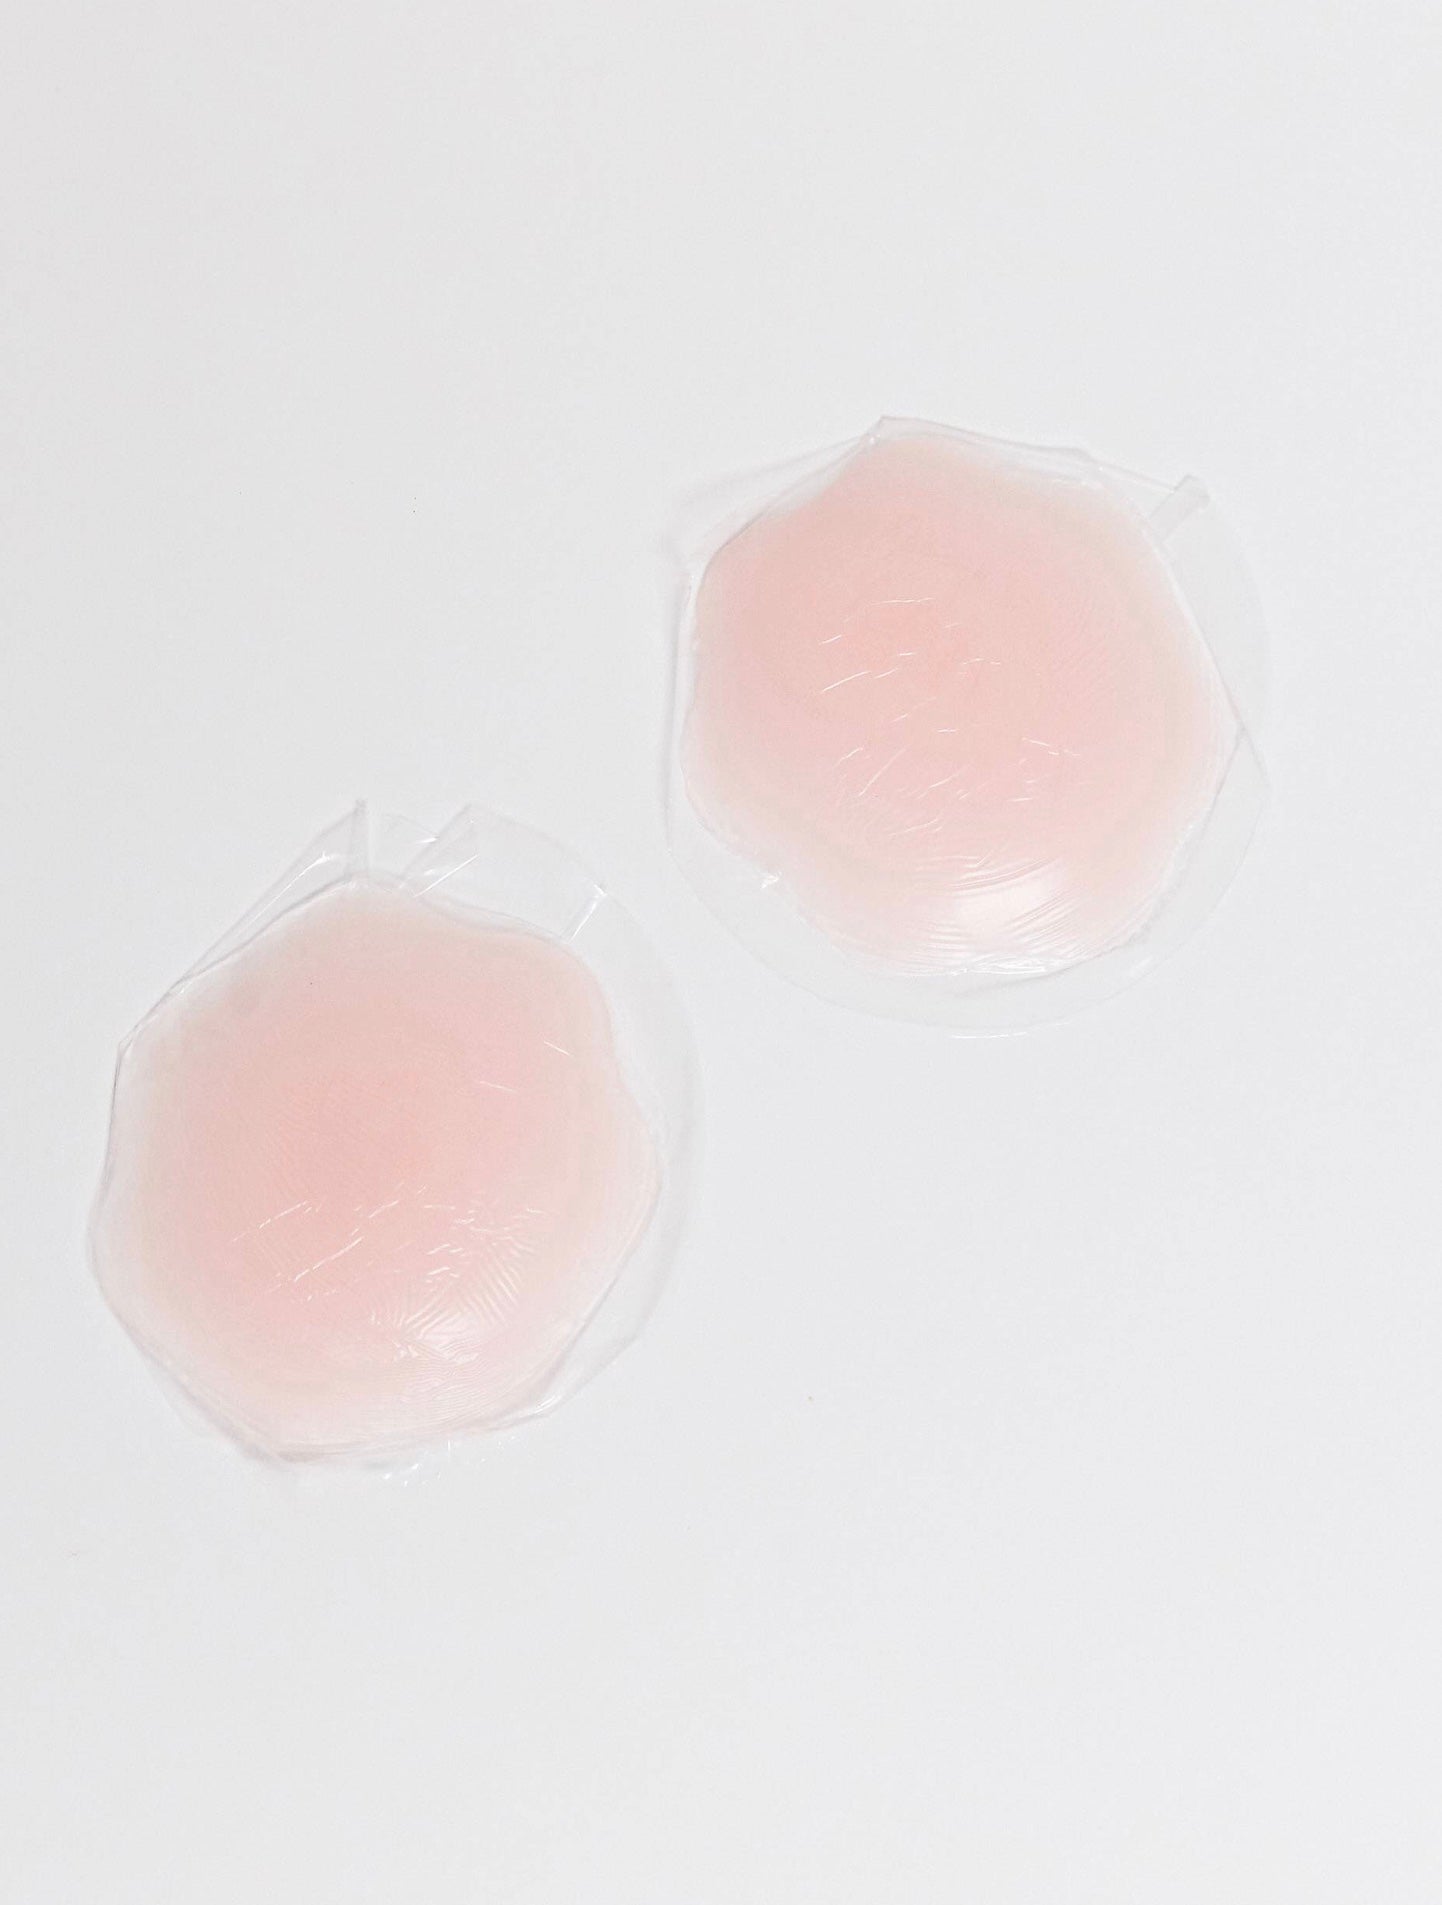 FK Silicone nipple cover pack in pink